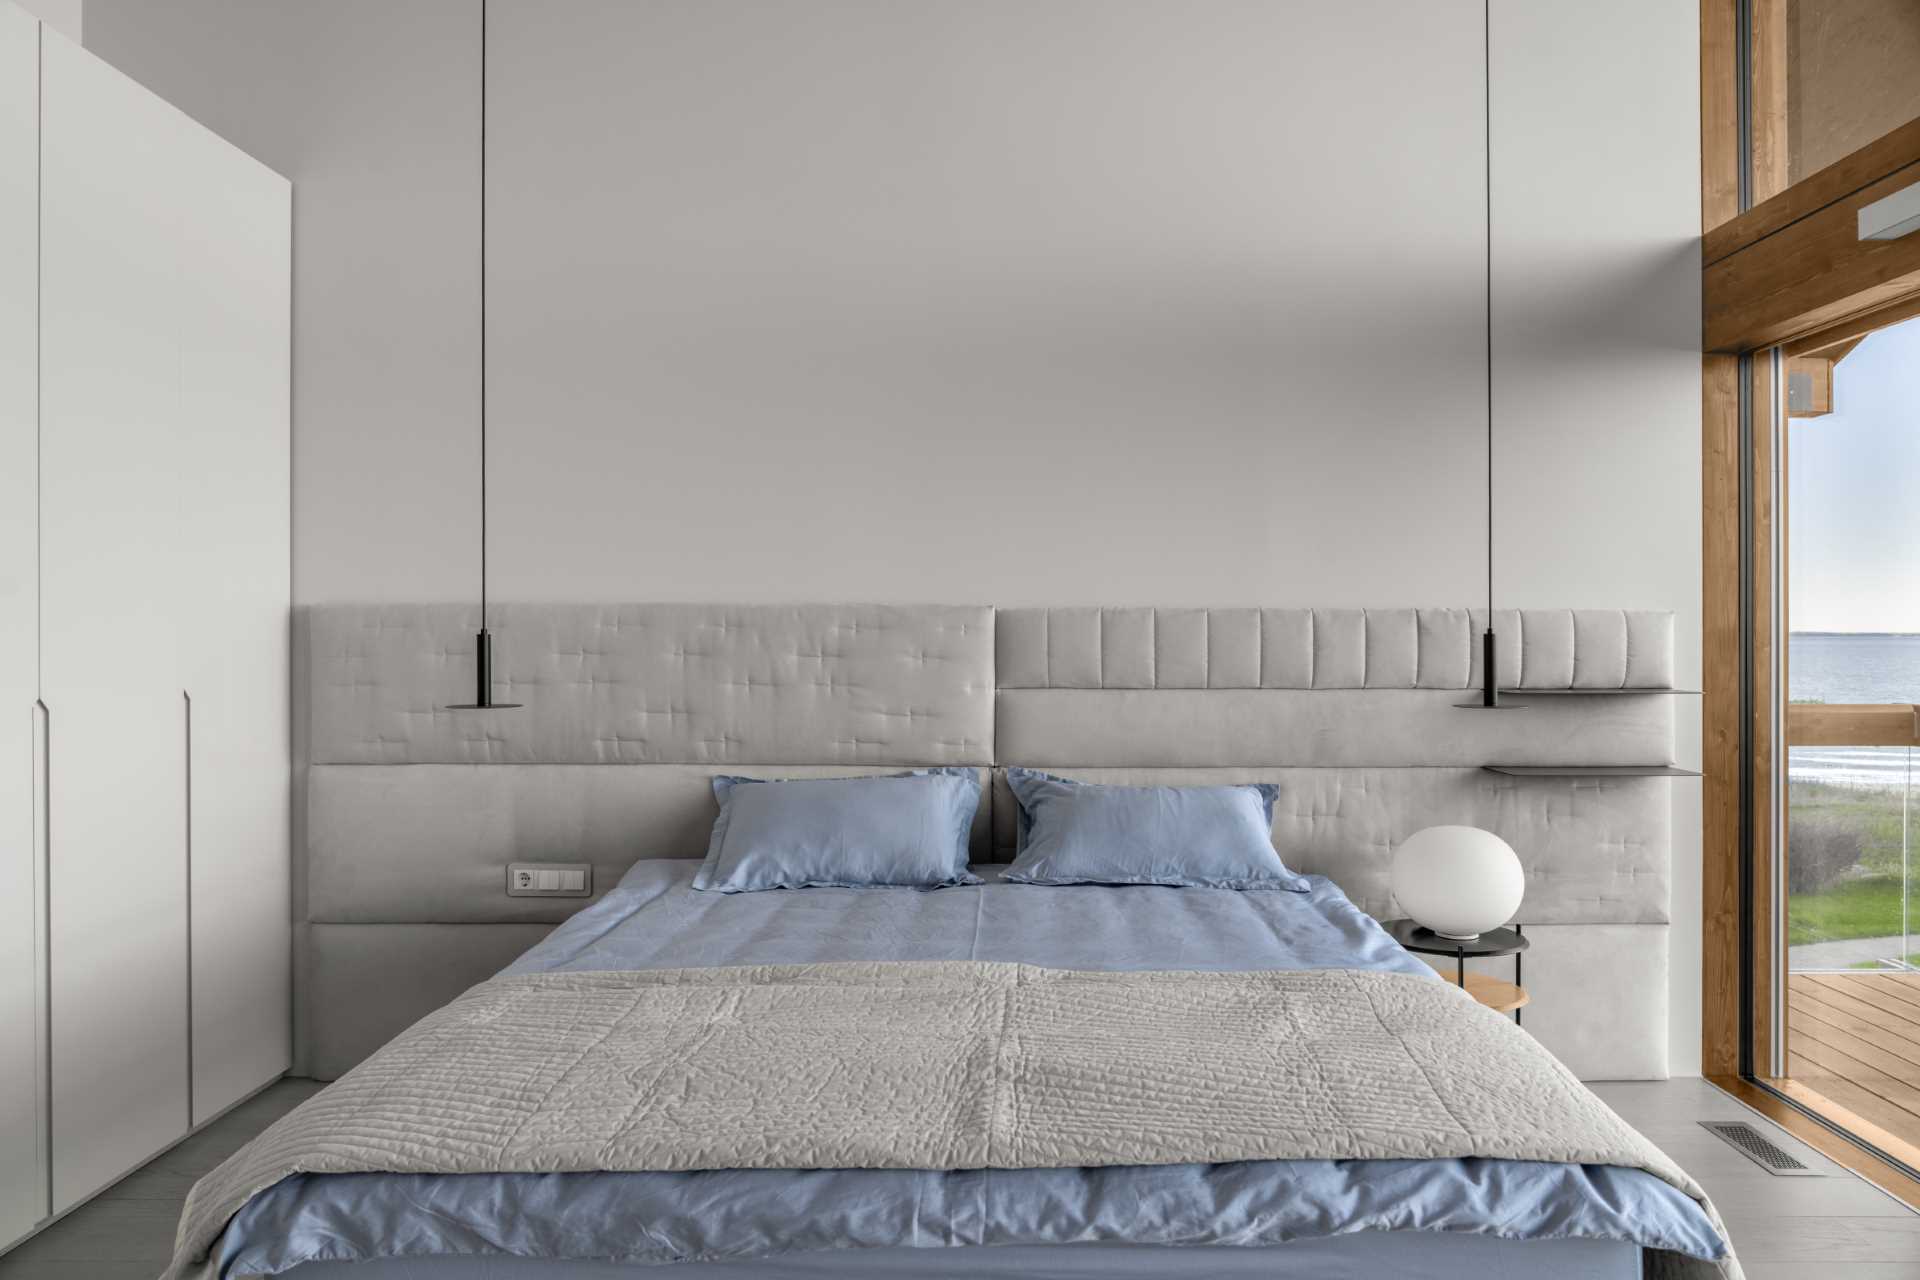 A modern baedroom with a gray, white, and blue theme.